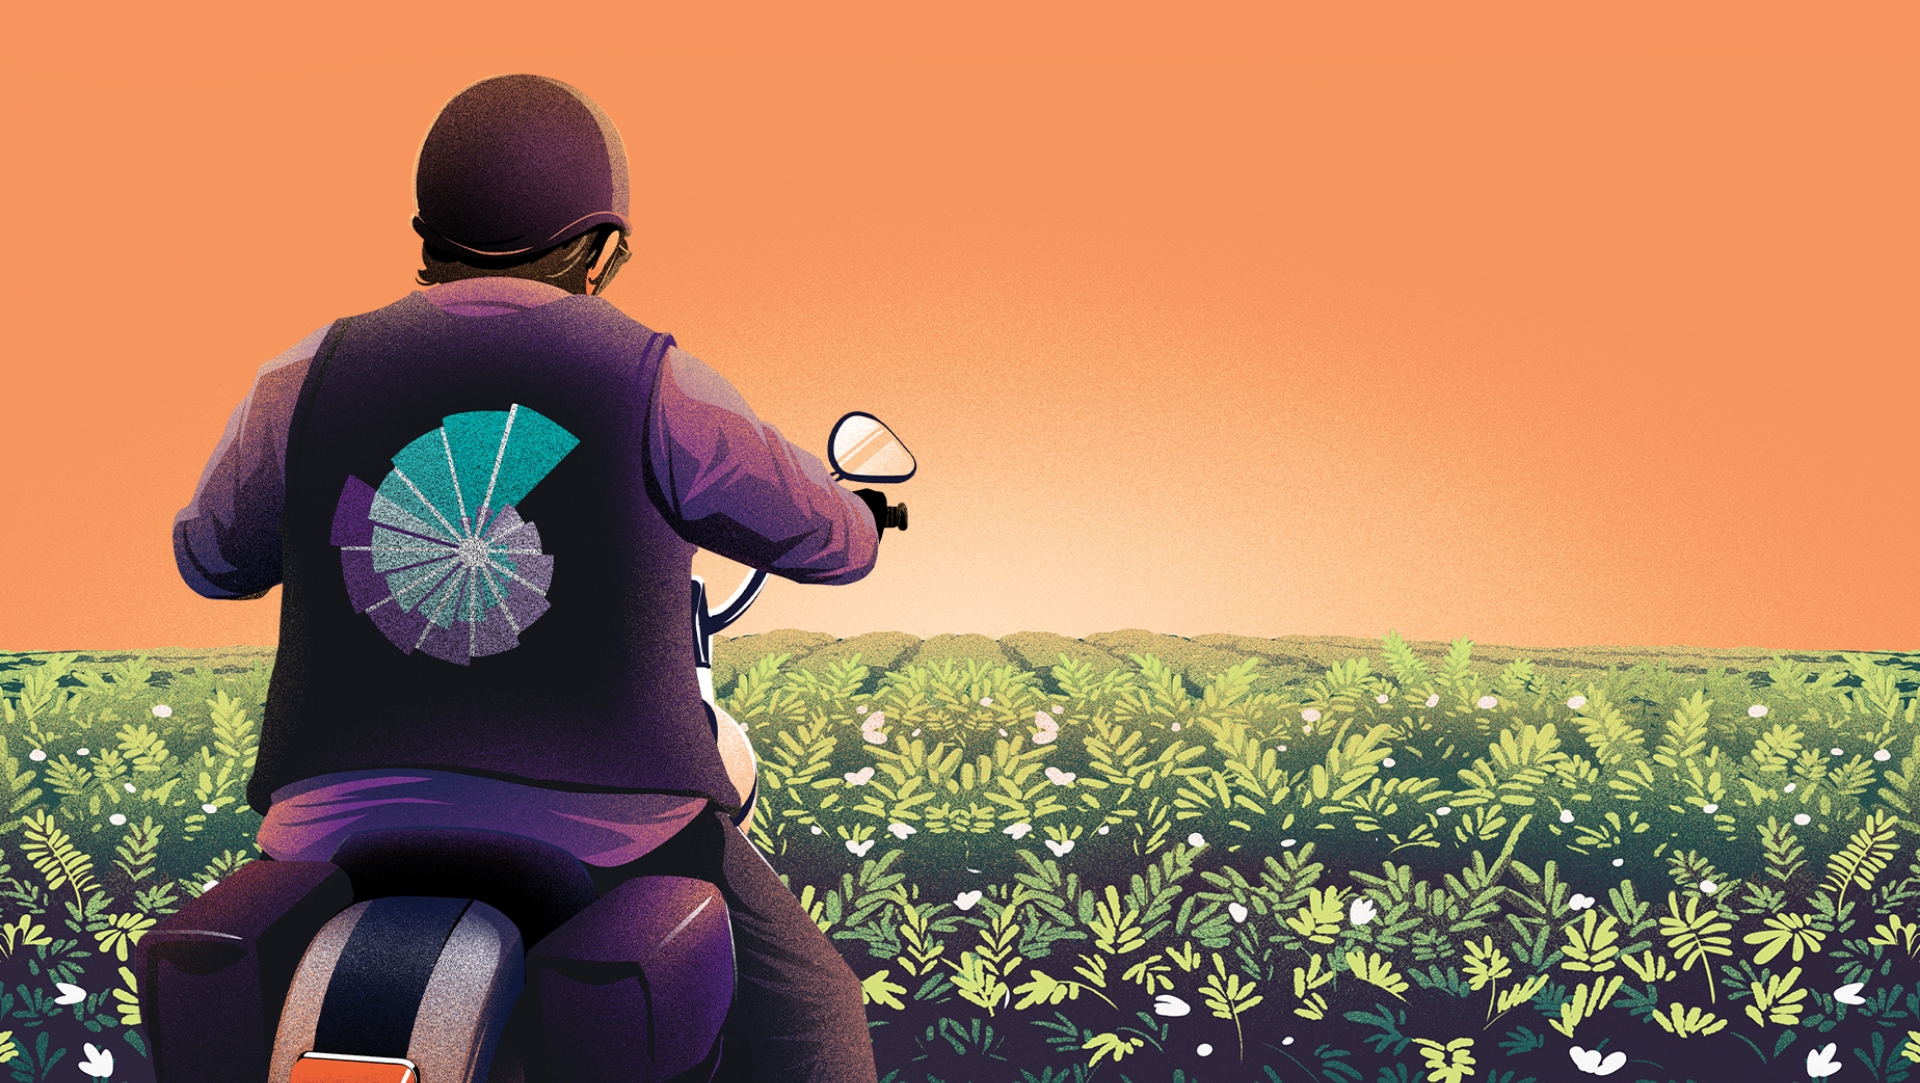 Illustration of a man on a motorcycle facing a field